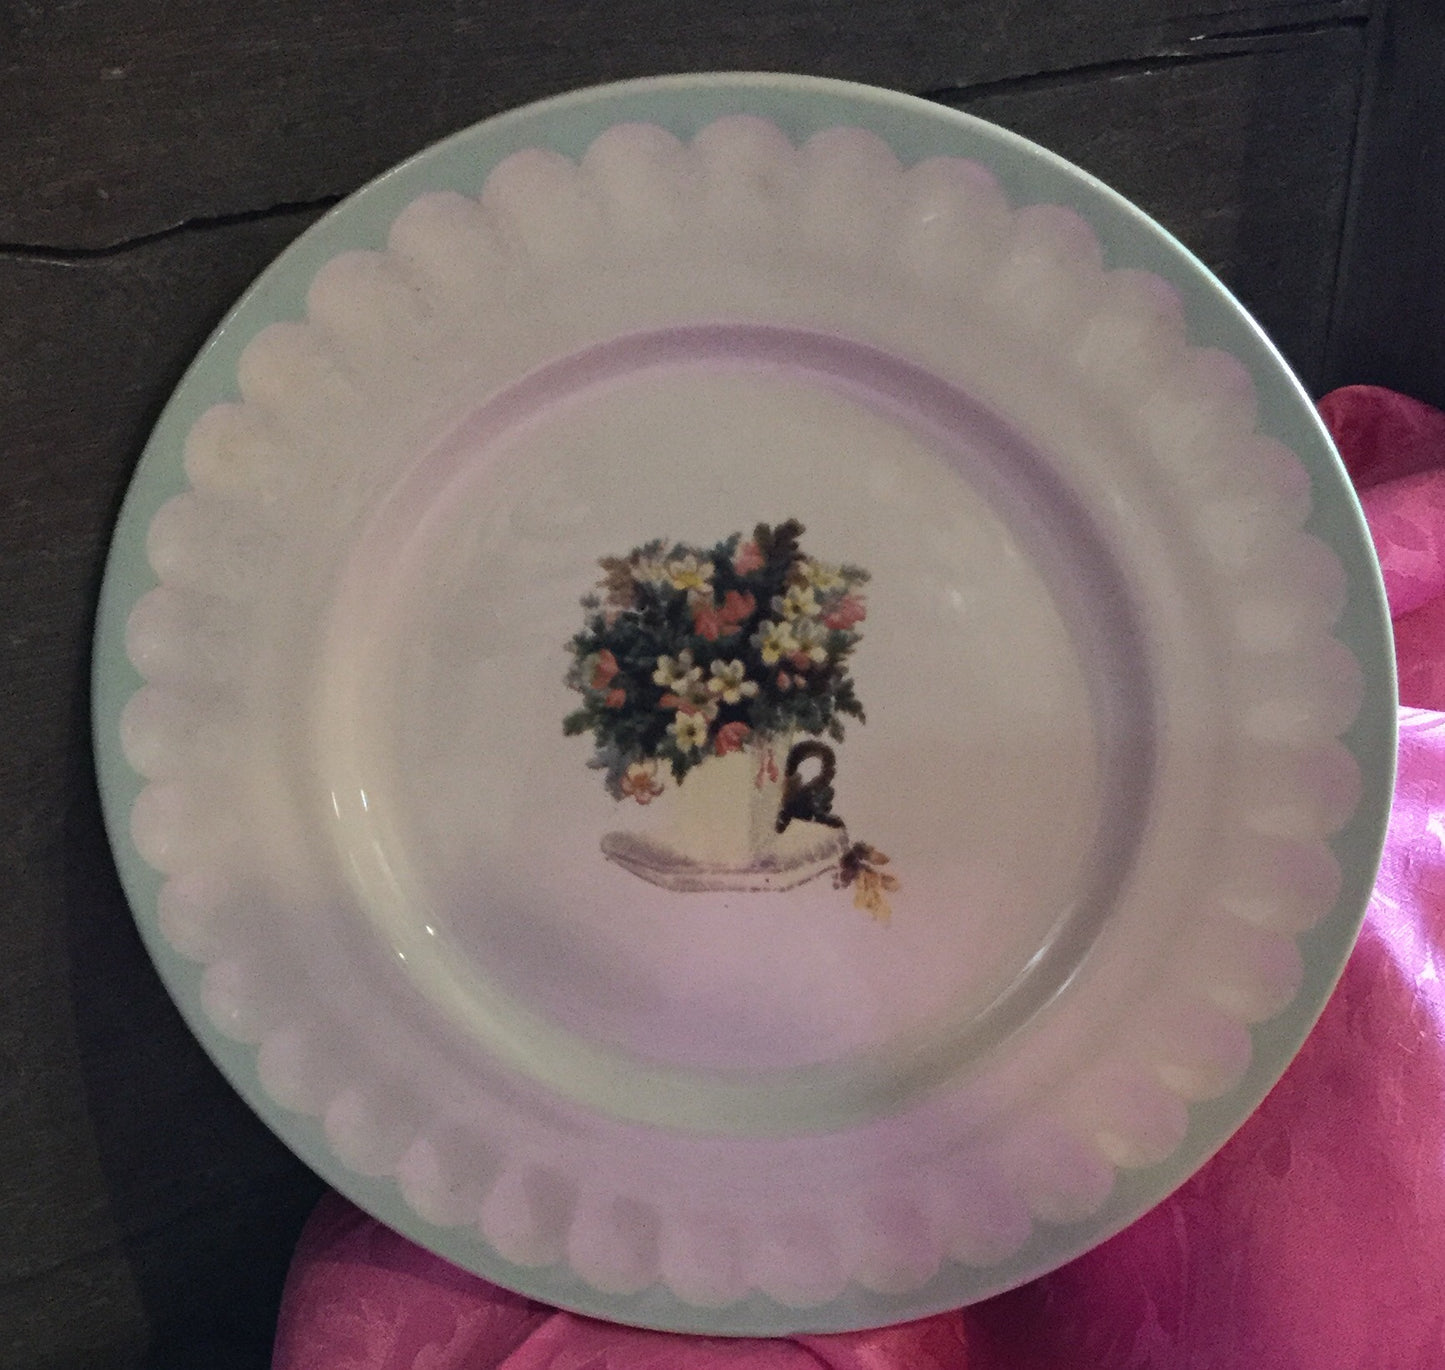 Mary's Dessert Plate Collection